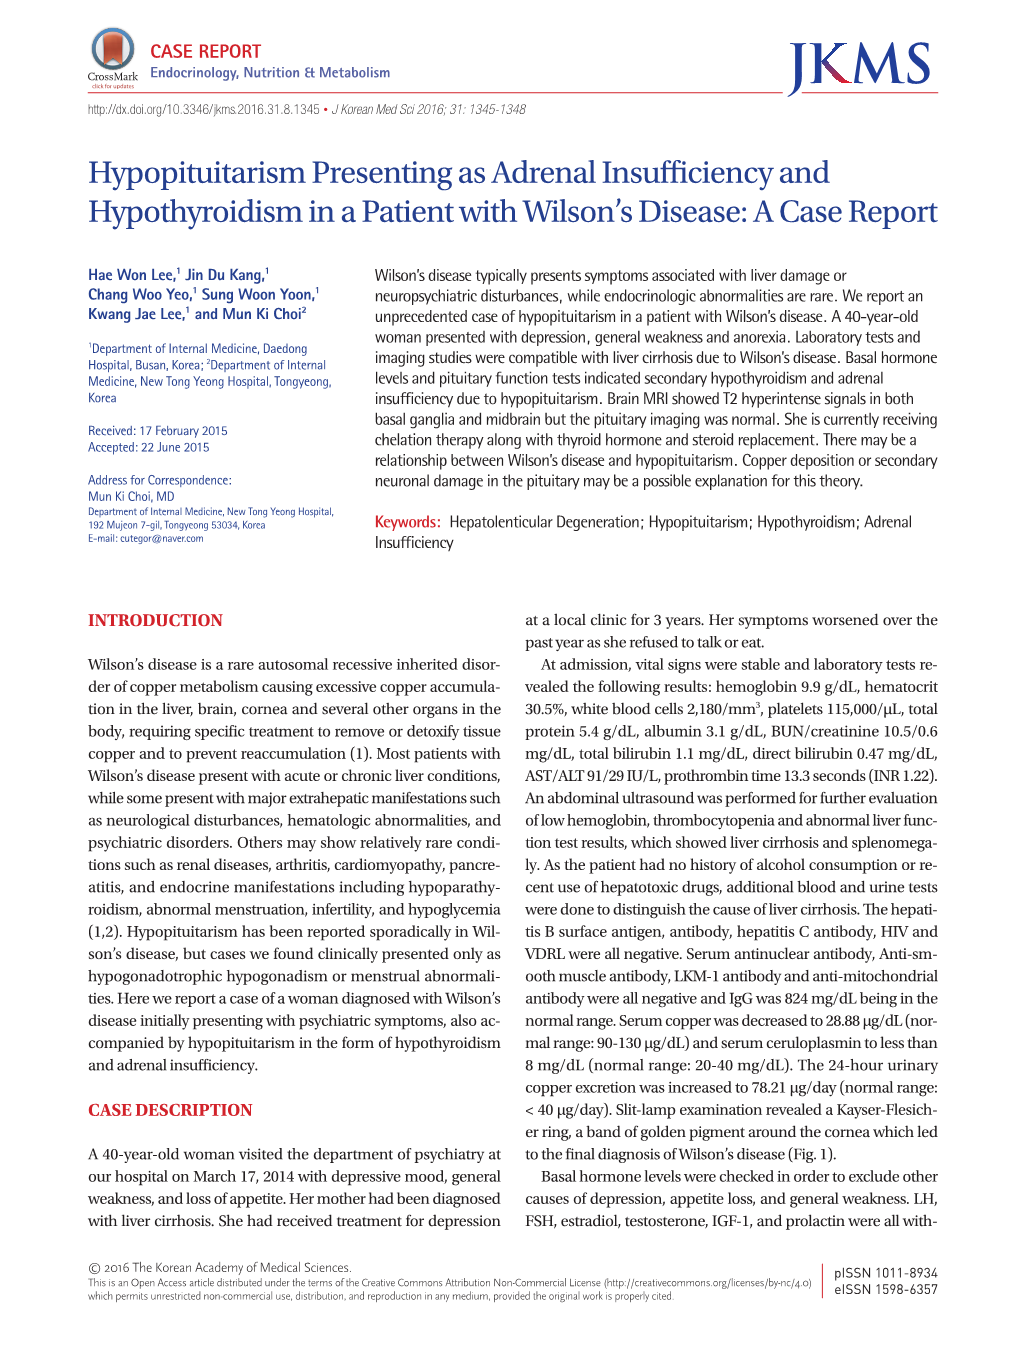 Hypopituitarism Presenting As Adrenal Insufficiency and Hypothyroidism in a Patient with Wilson’S Disease: a Case Report